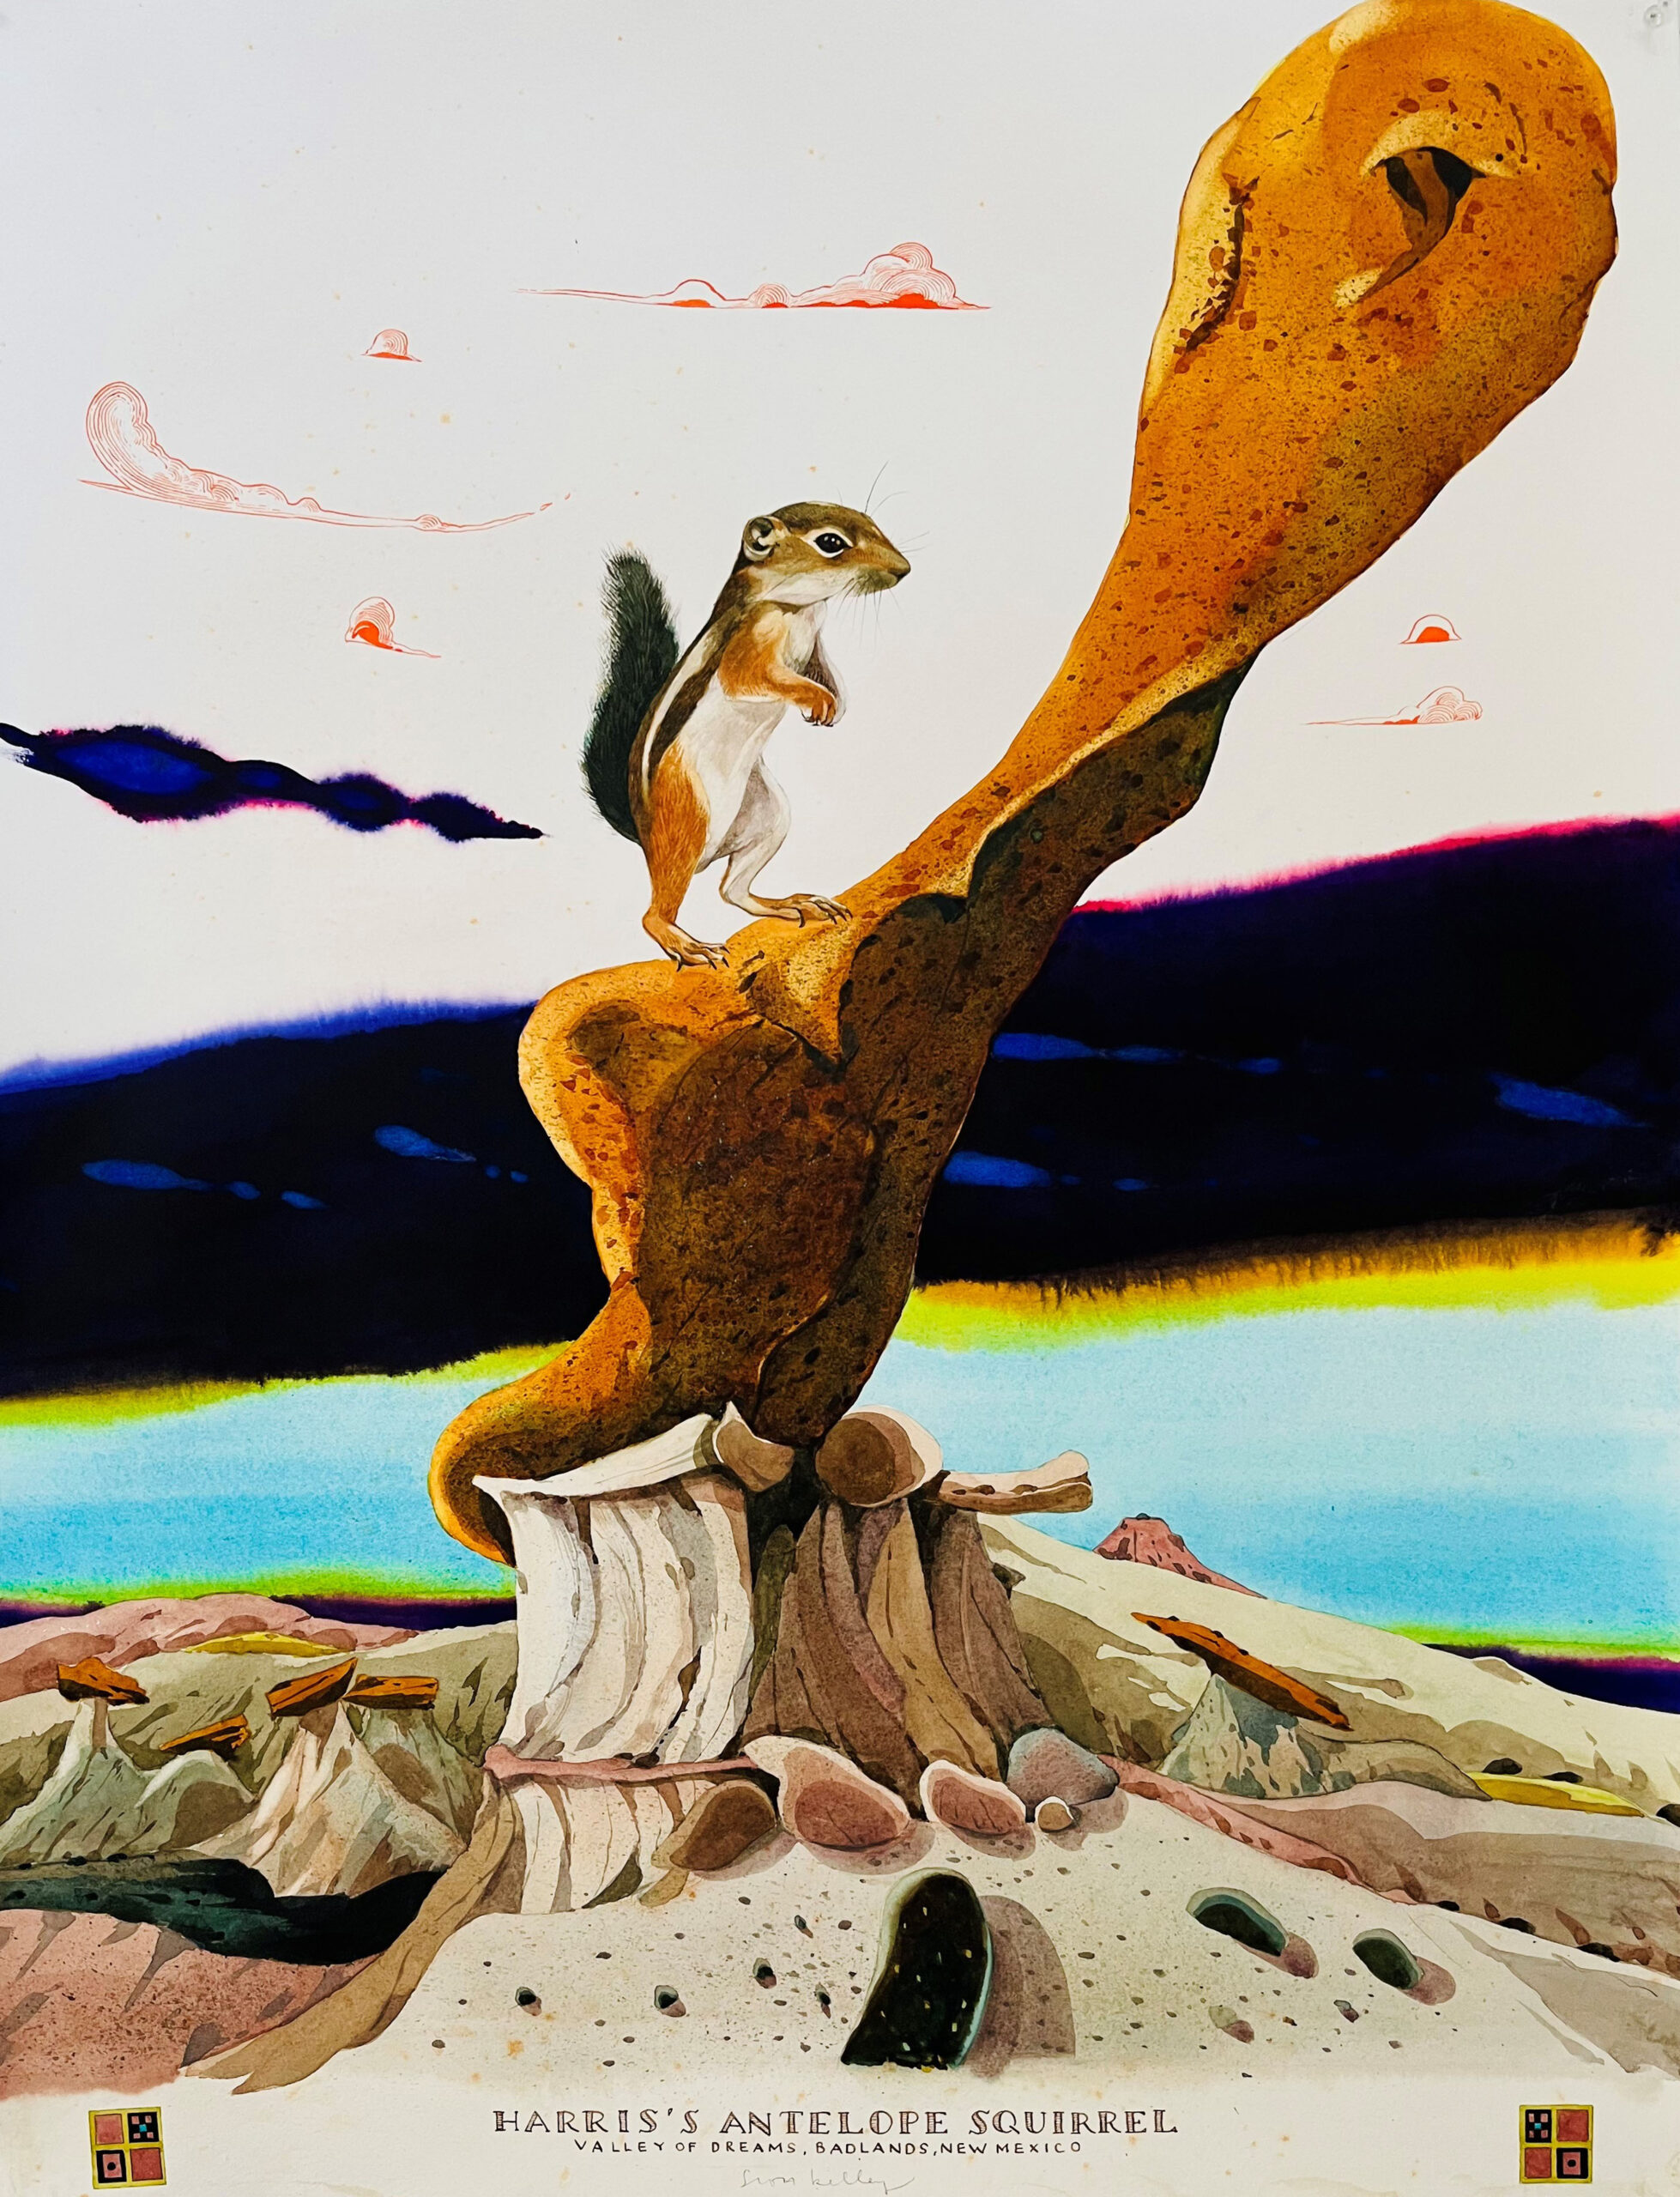 
		                					Scott Kelley		                																	
																											<i>Harris' Antelope Squirrel,</i>  
																																								2023, 
																																								watercolor, gouache and graphite on paper, 
																																								40 x 30 inches 
																								
		                				